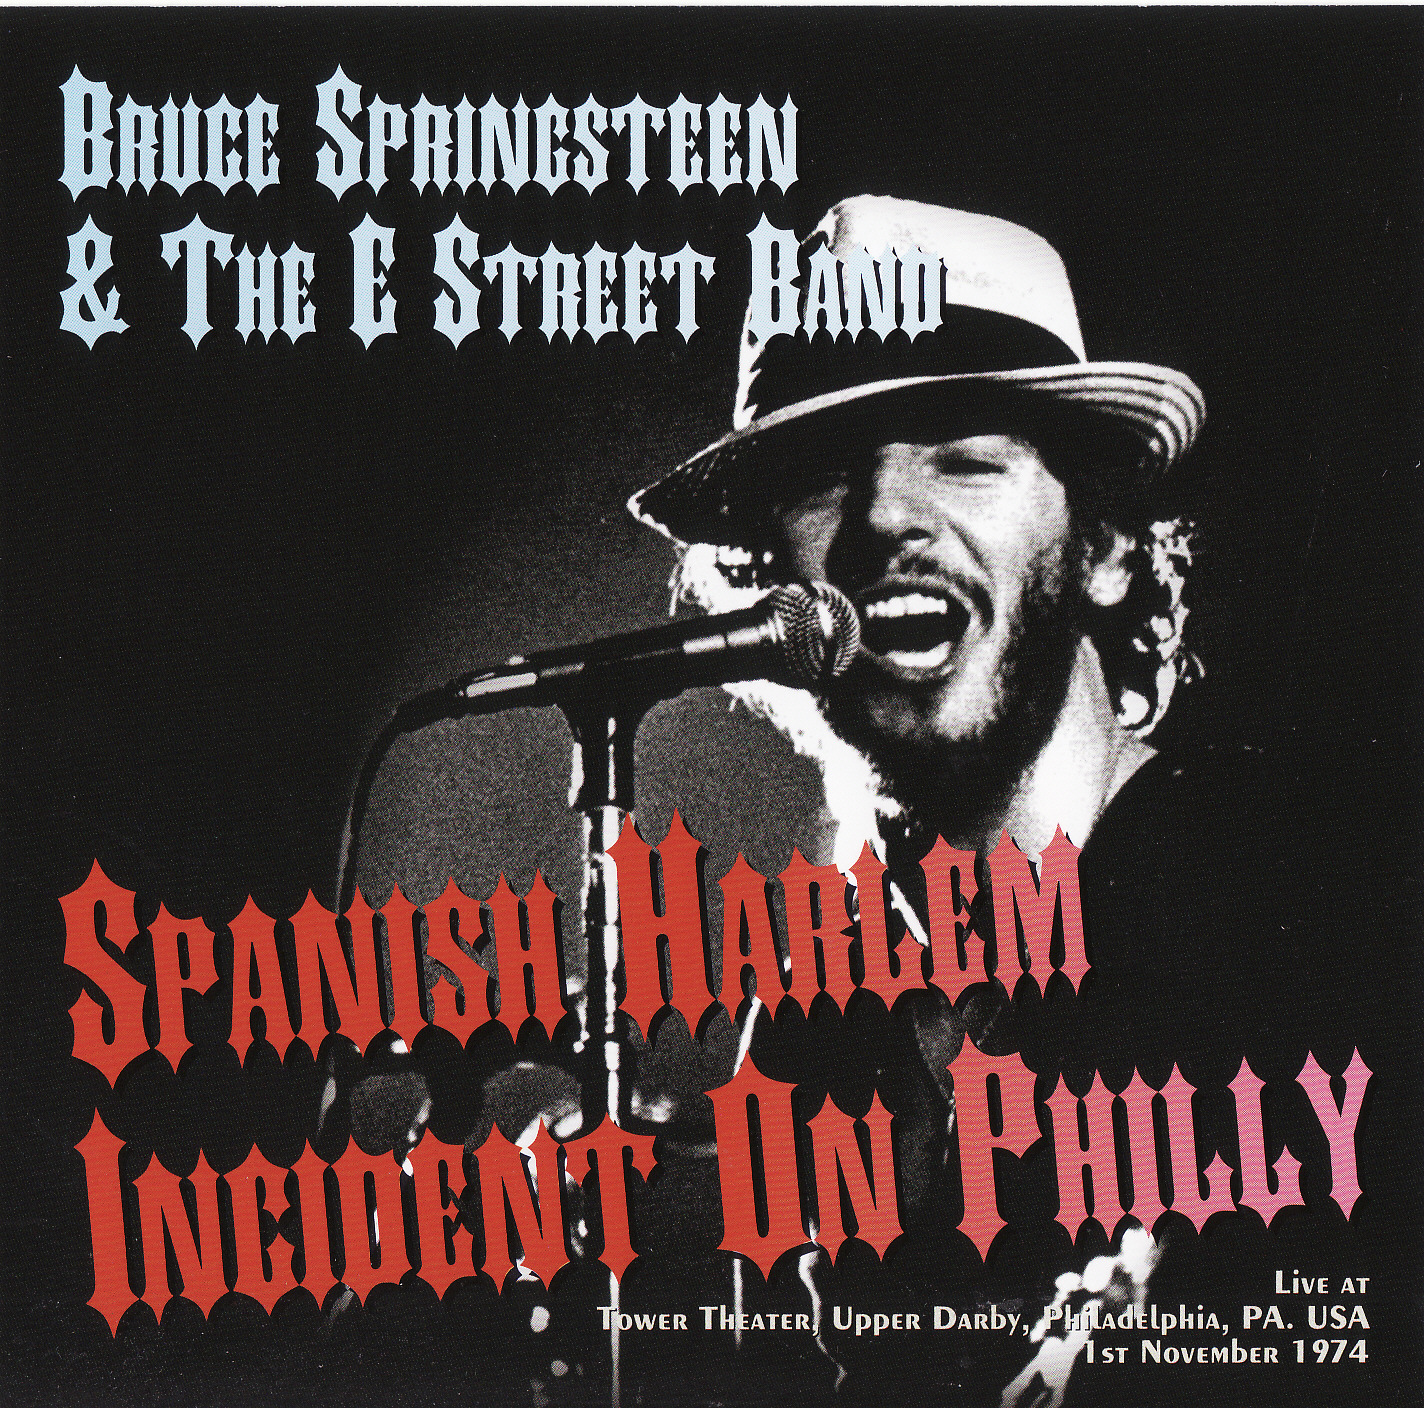 Bruce Springsteen Collection 1973 2012 Flac Torrent